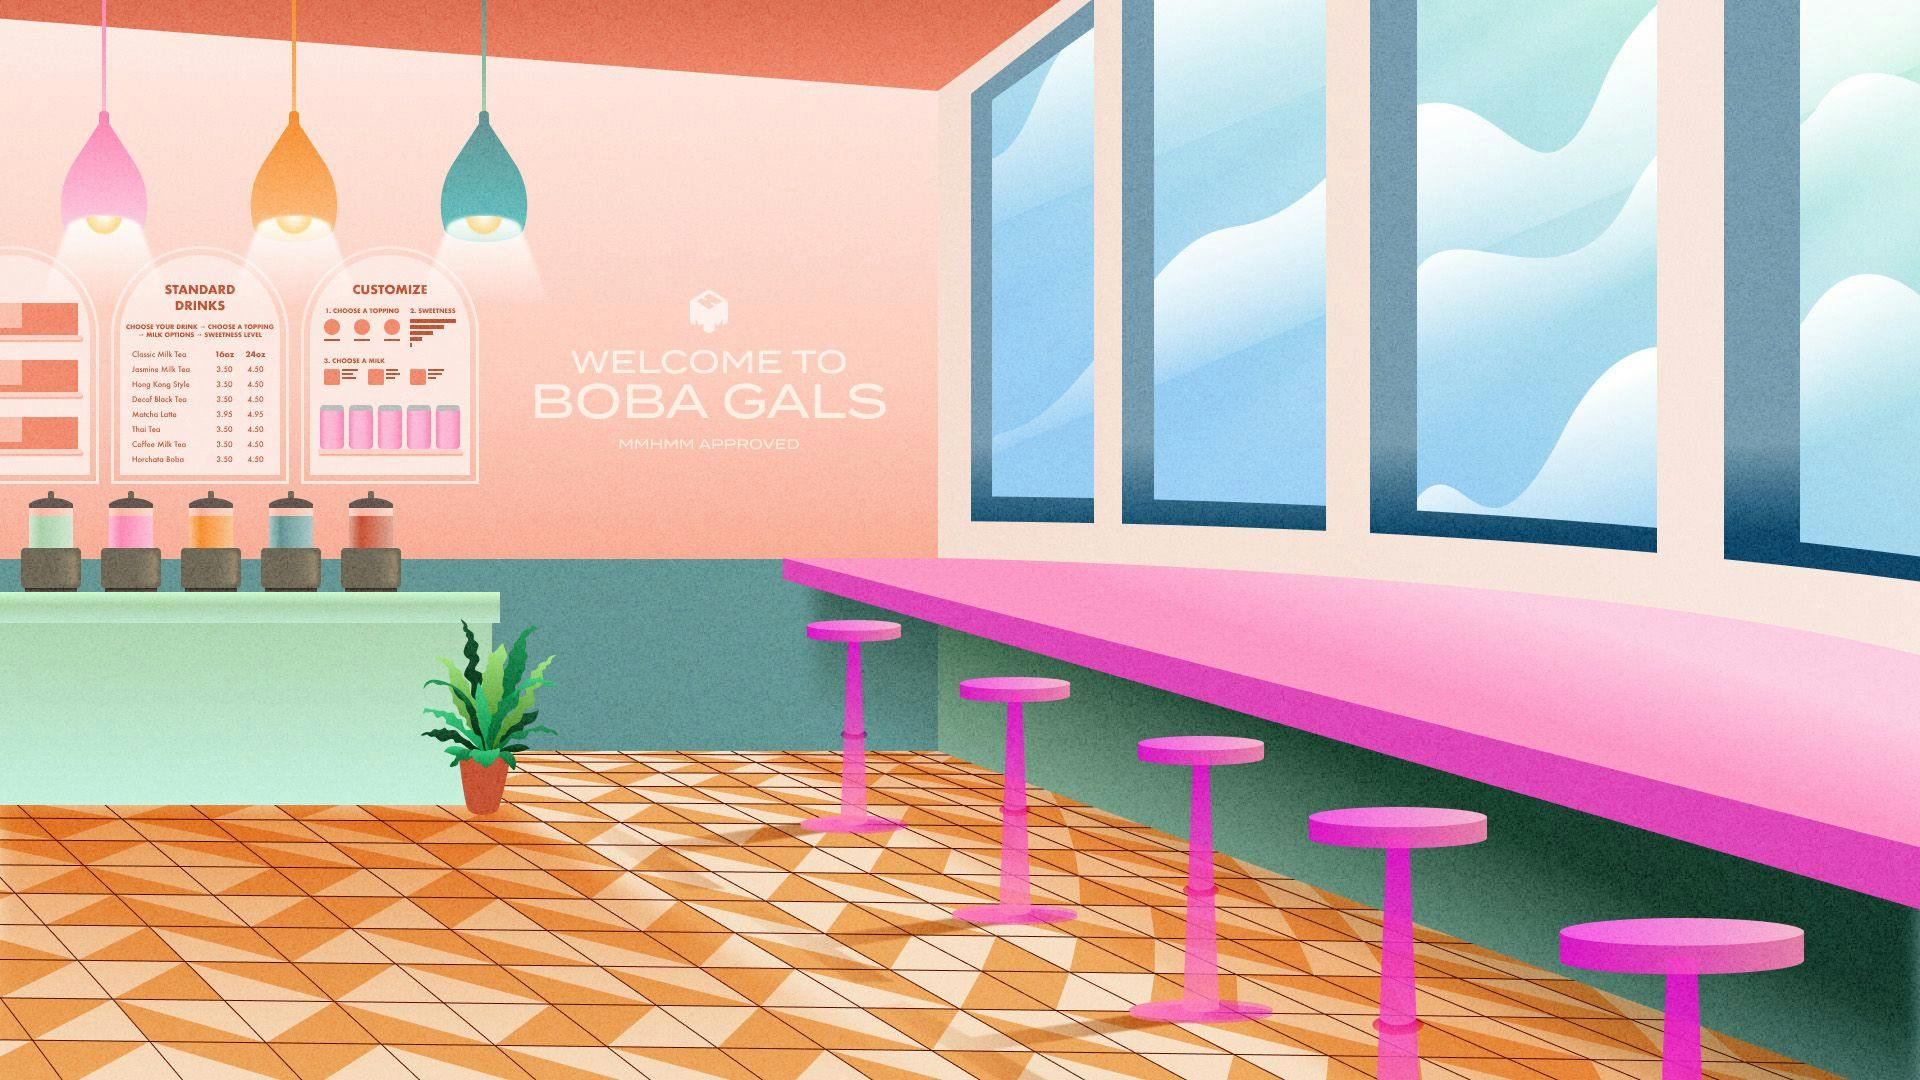 Illustration of boba cafe with pink stools, pink counter, blenders, and menu with a sign in that says Welcome to Boba Gals